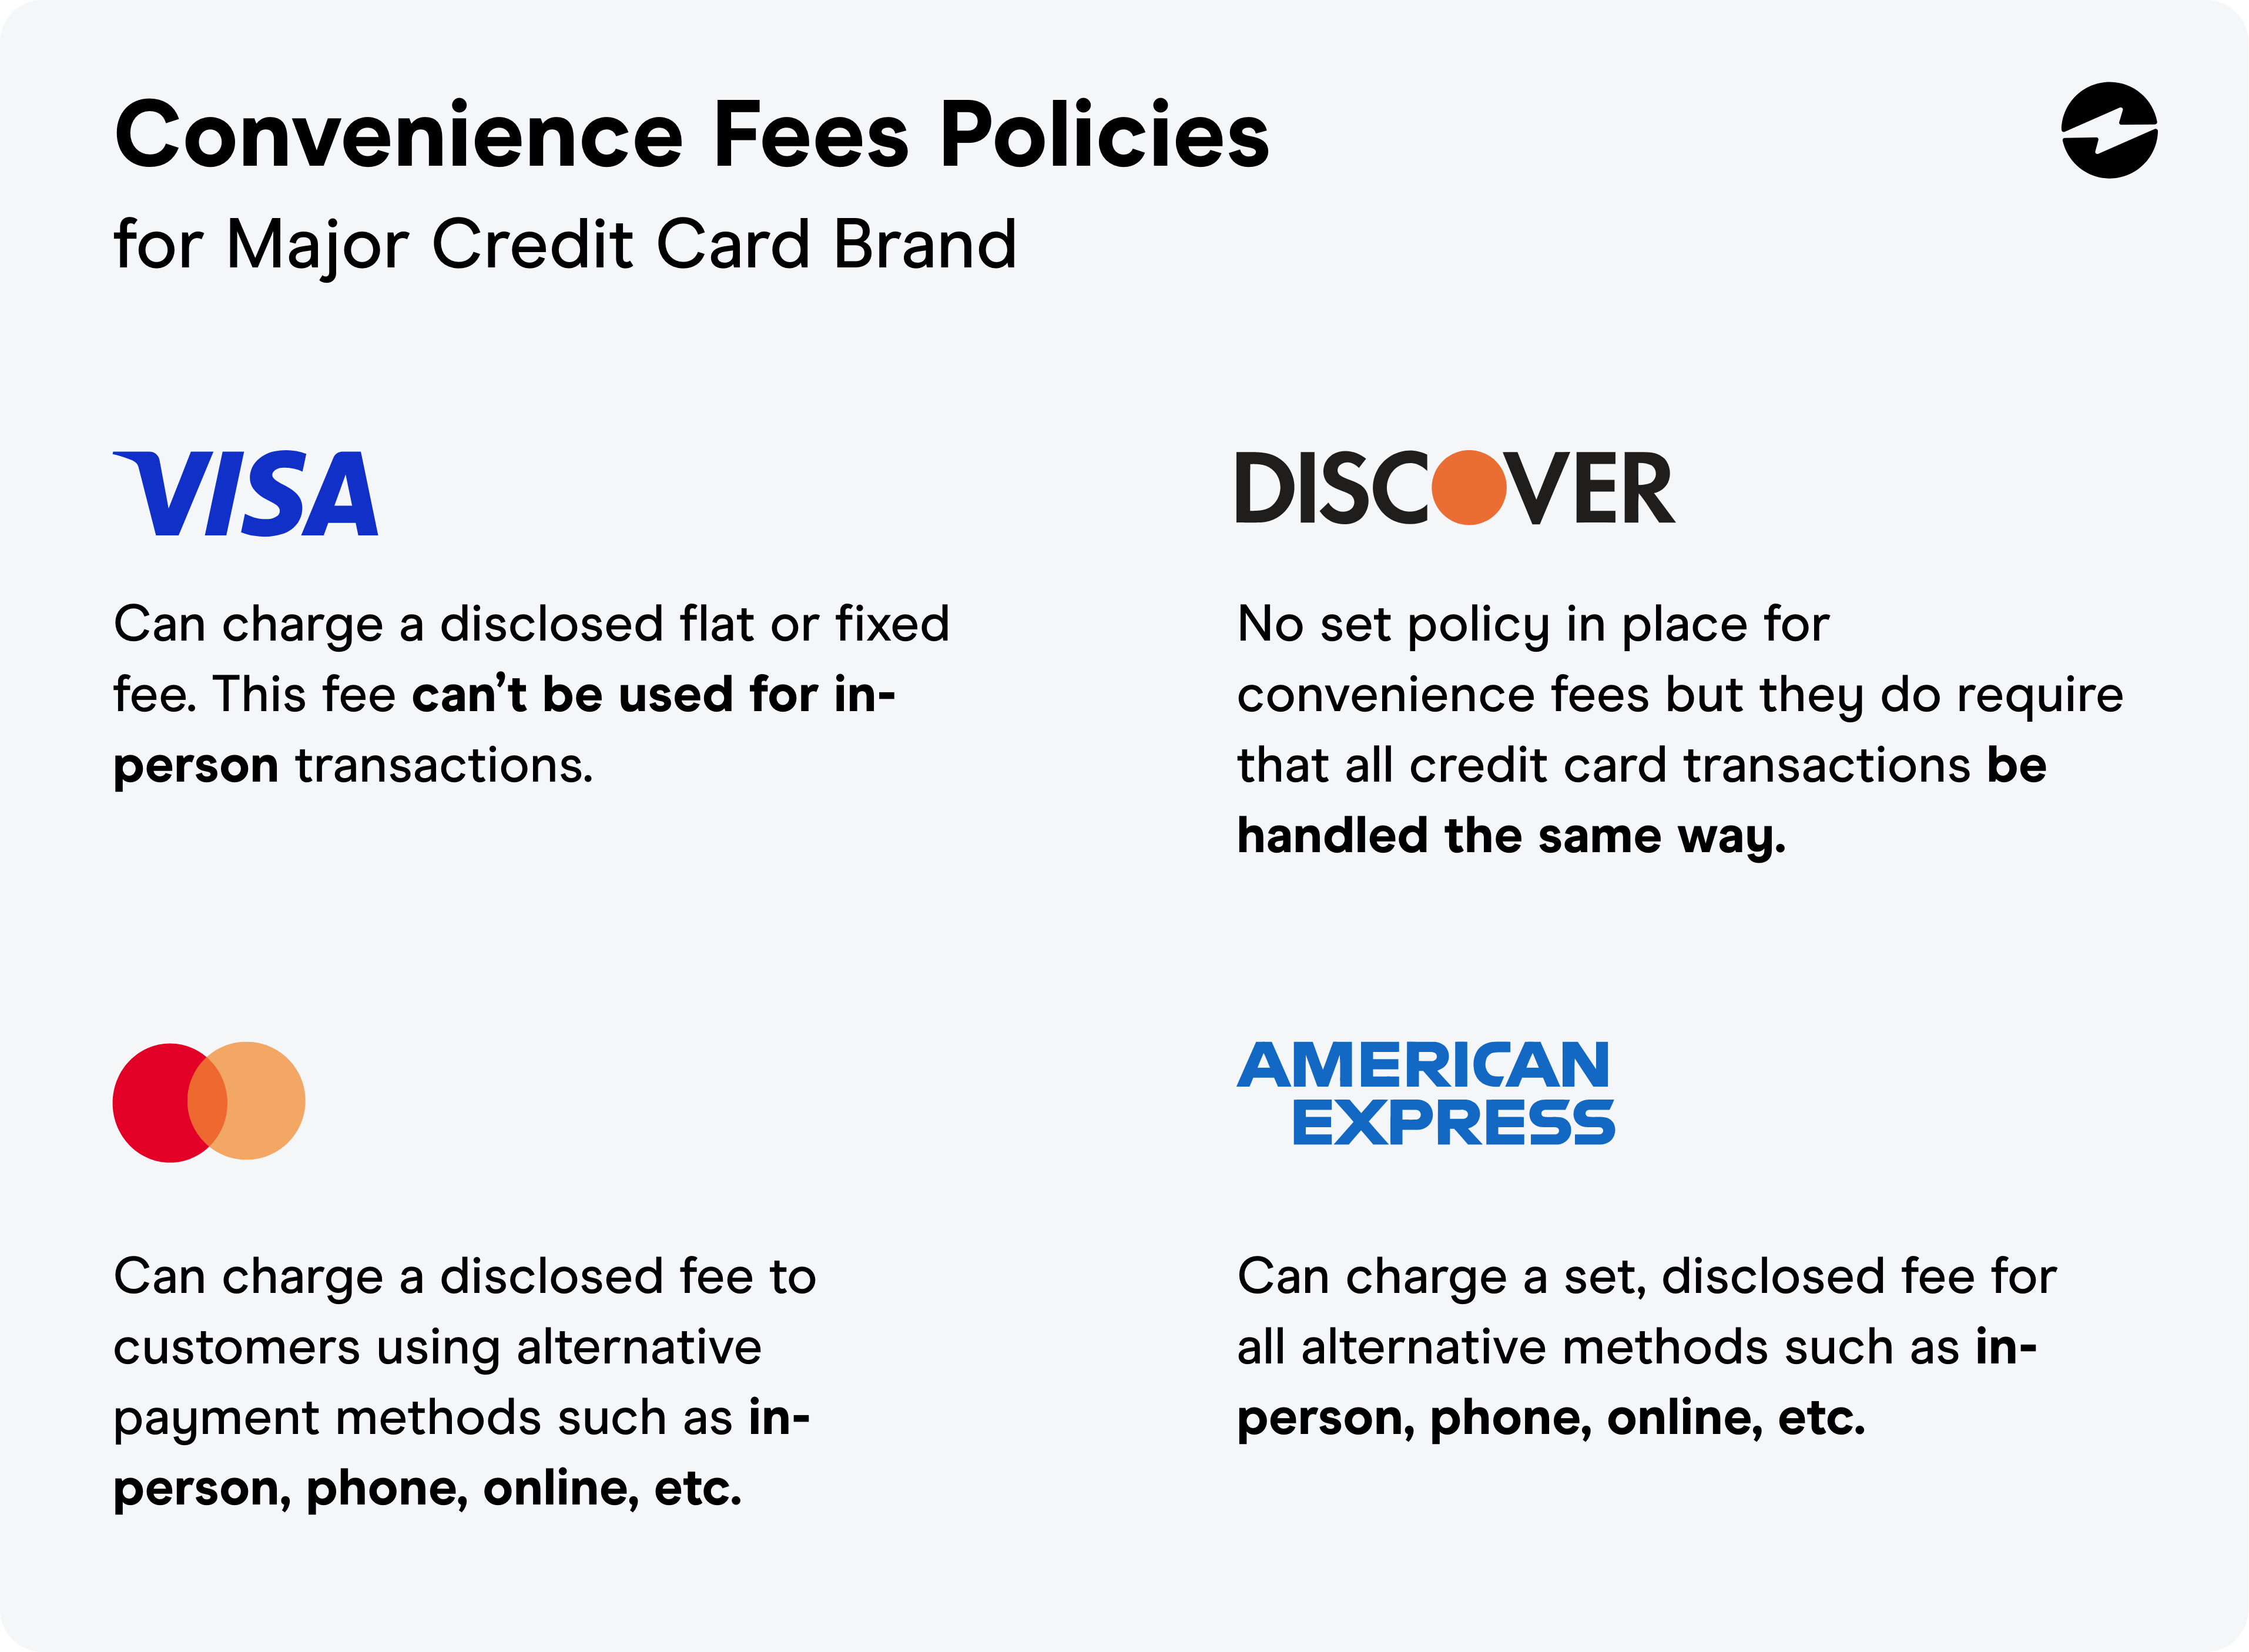 Convenience Fees for Major Card Brands